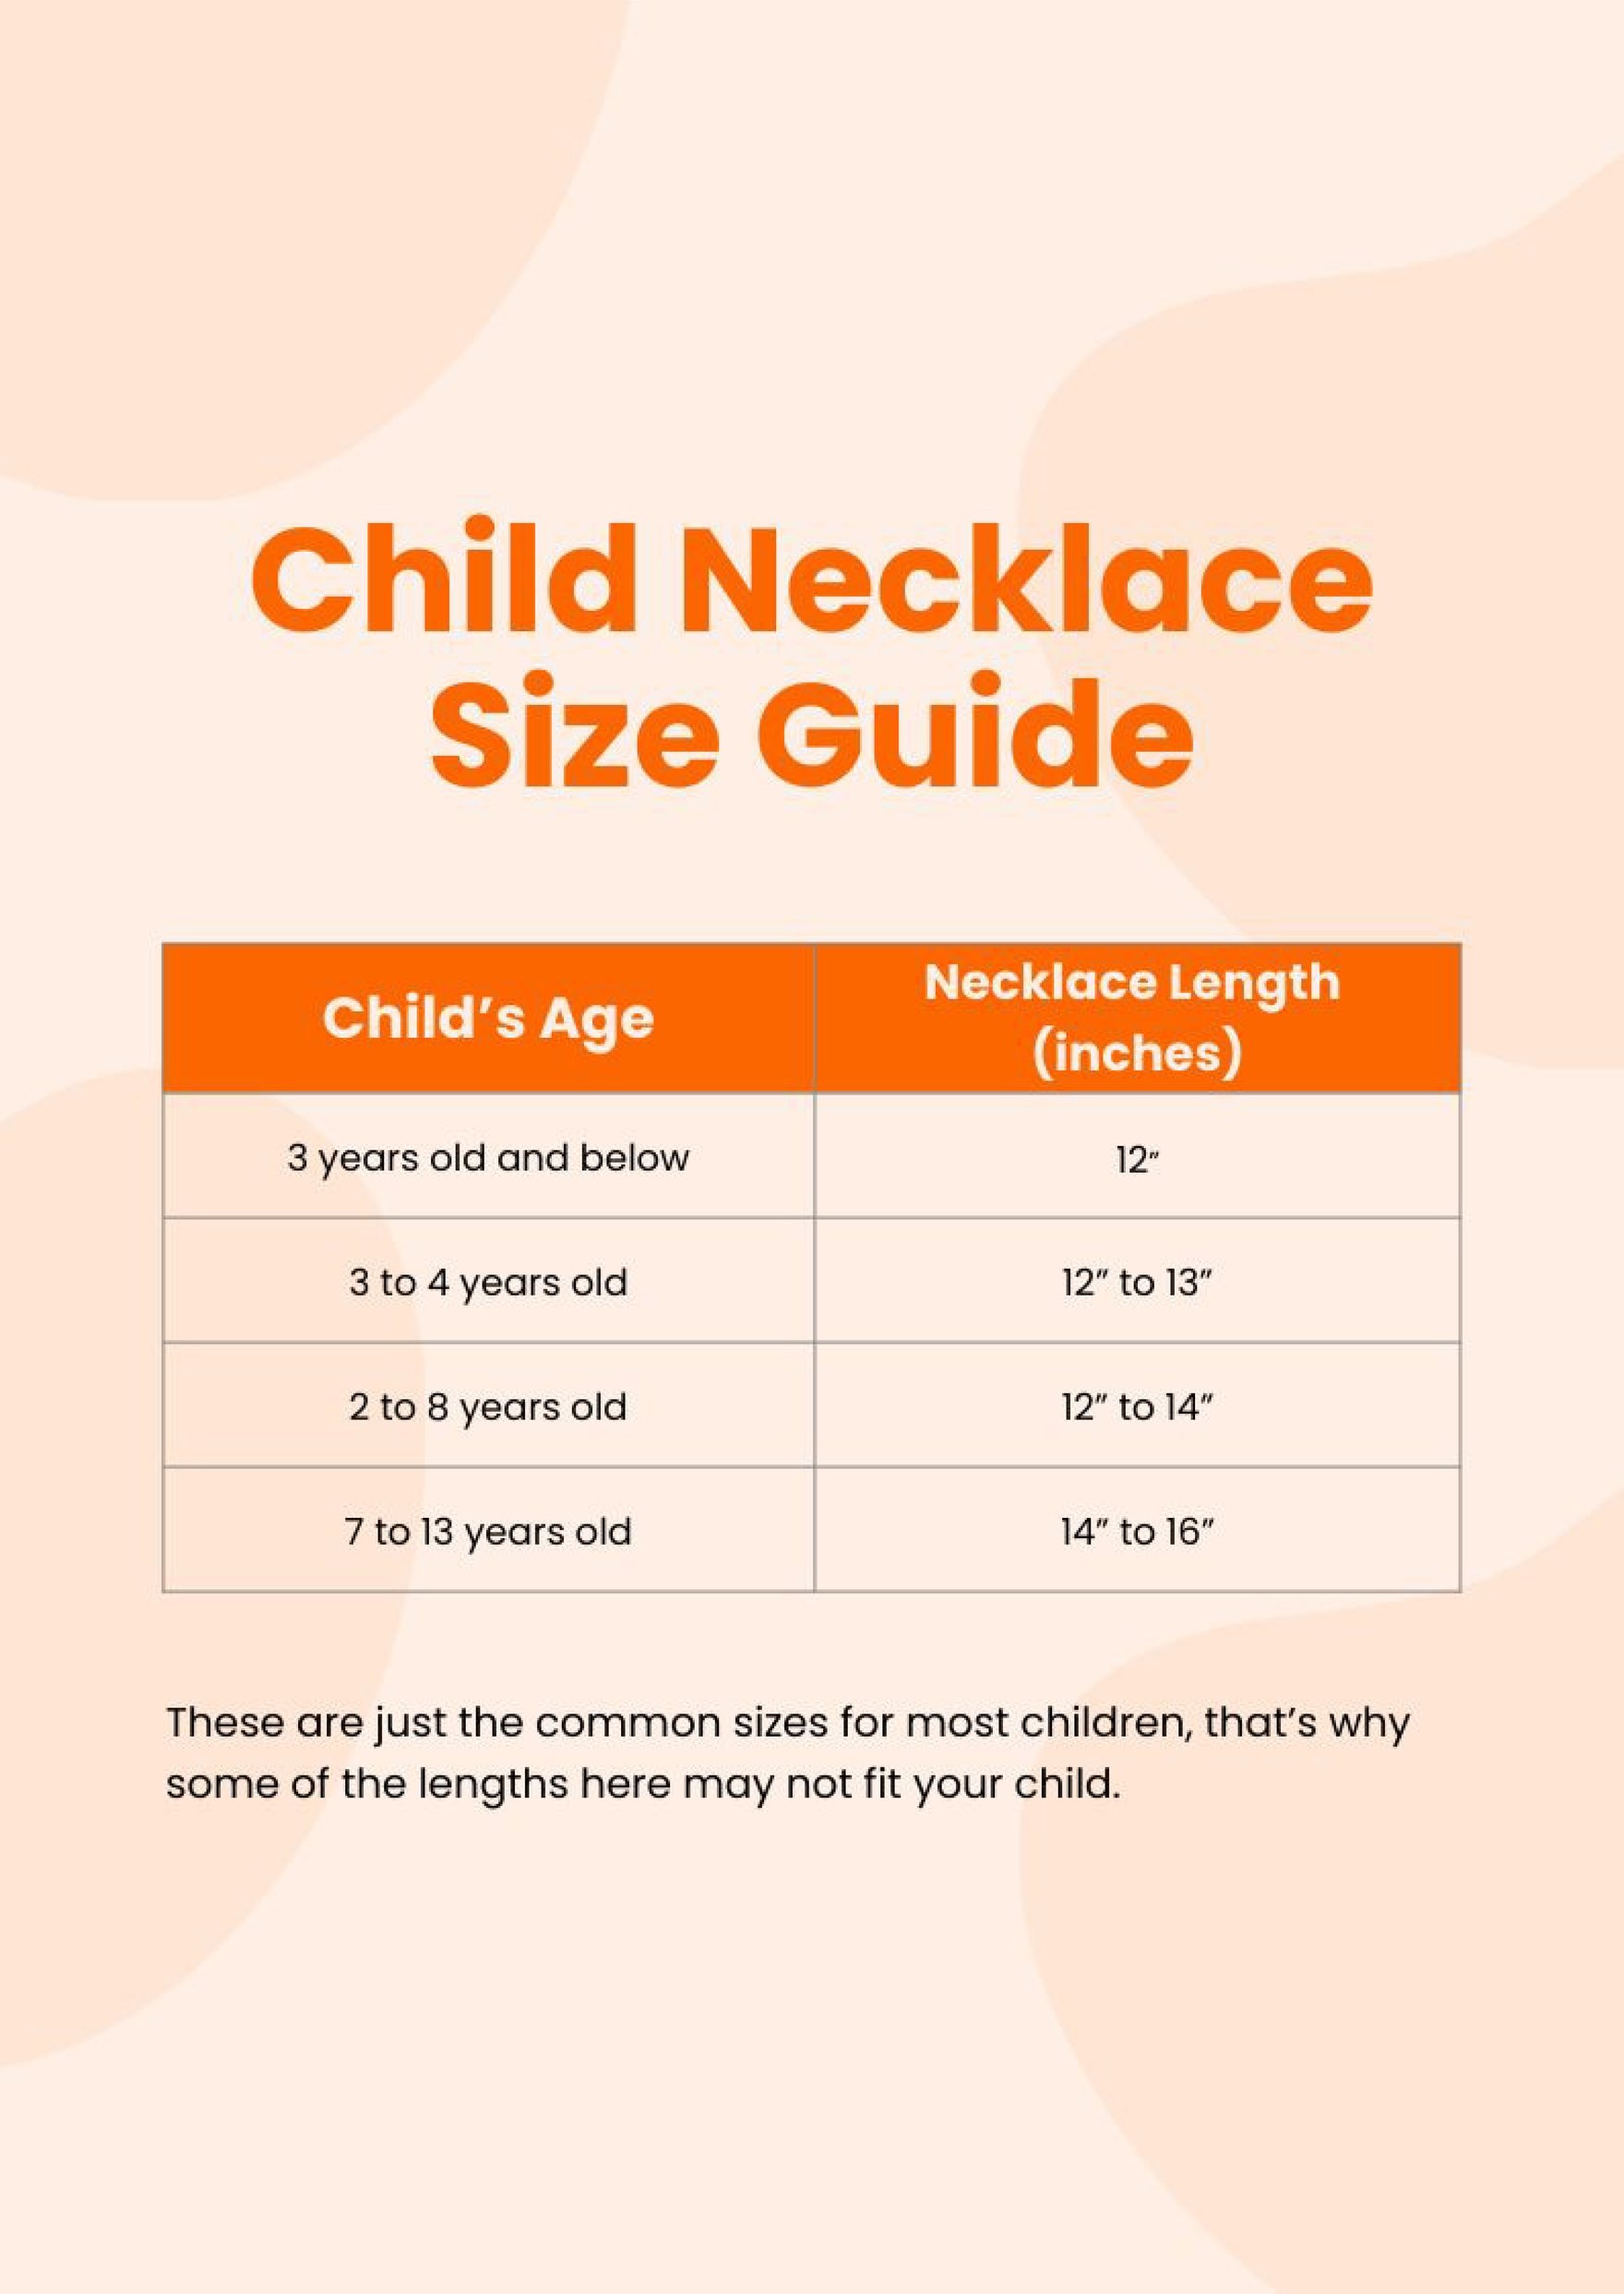 Child Necklace Size Chart in PDF, Illustrator